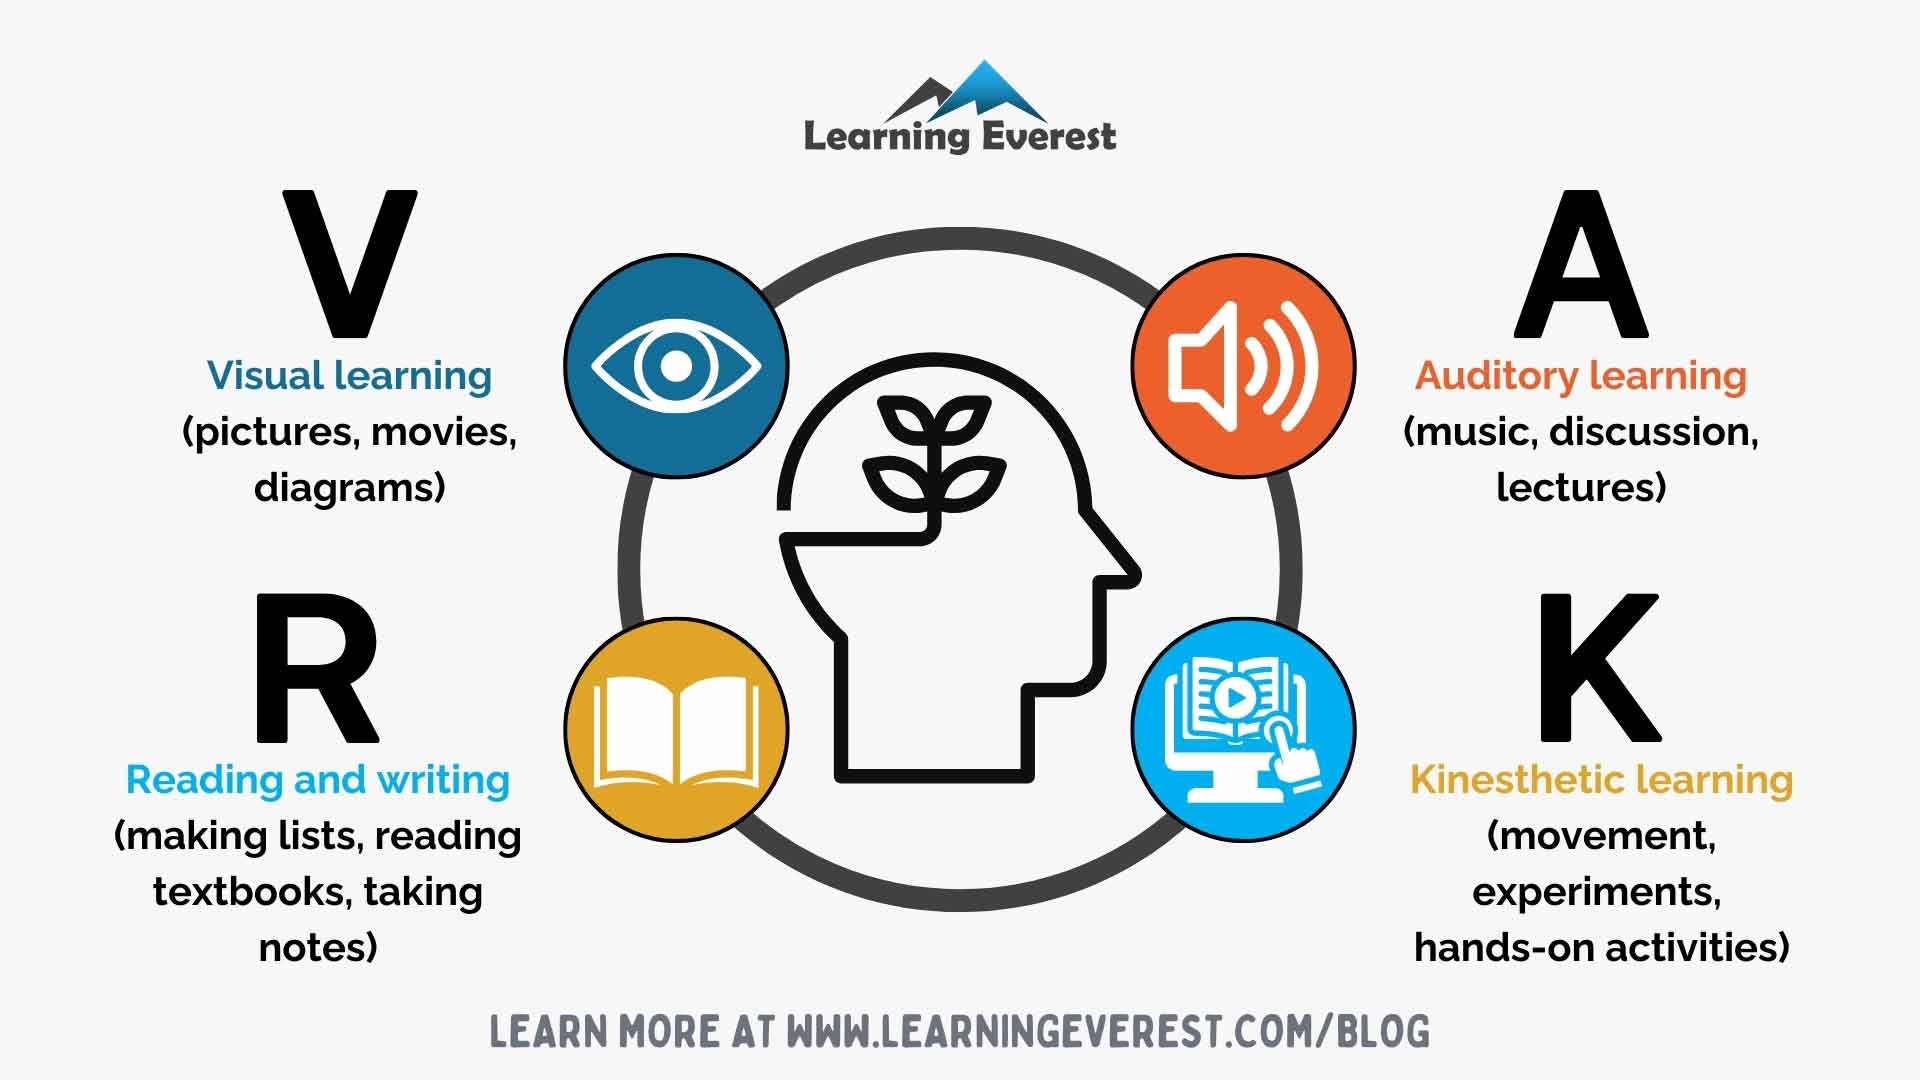 4 Different types of learning styles according to the VARK model